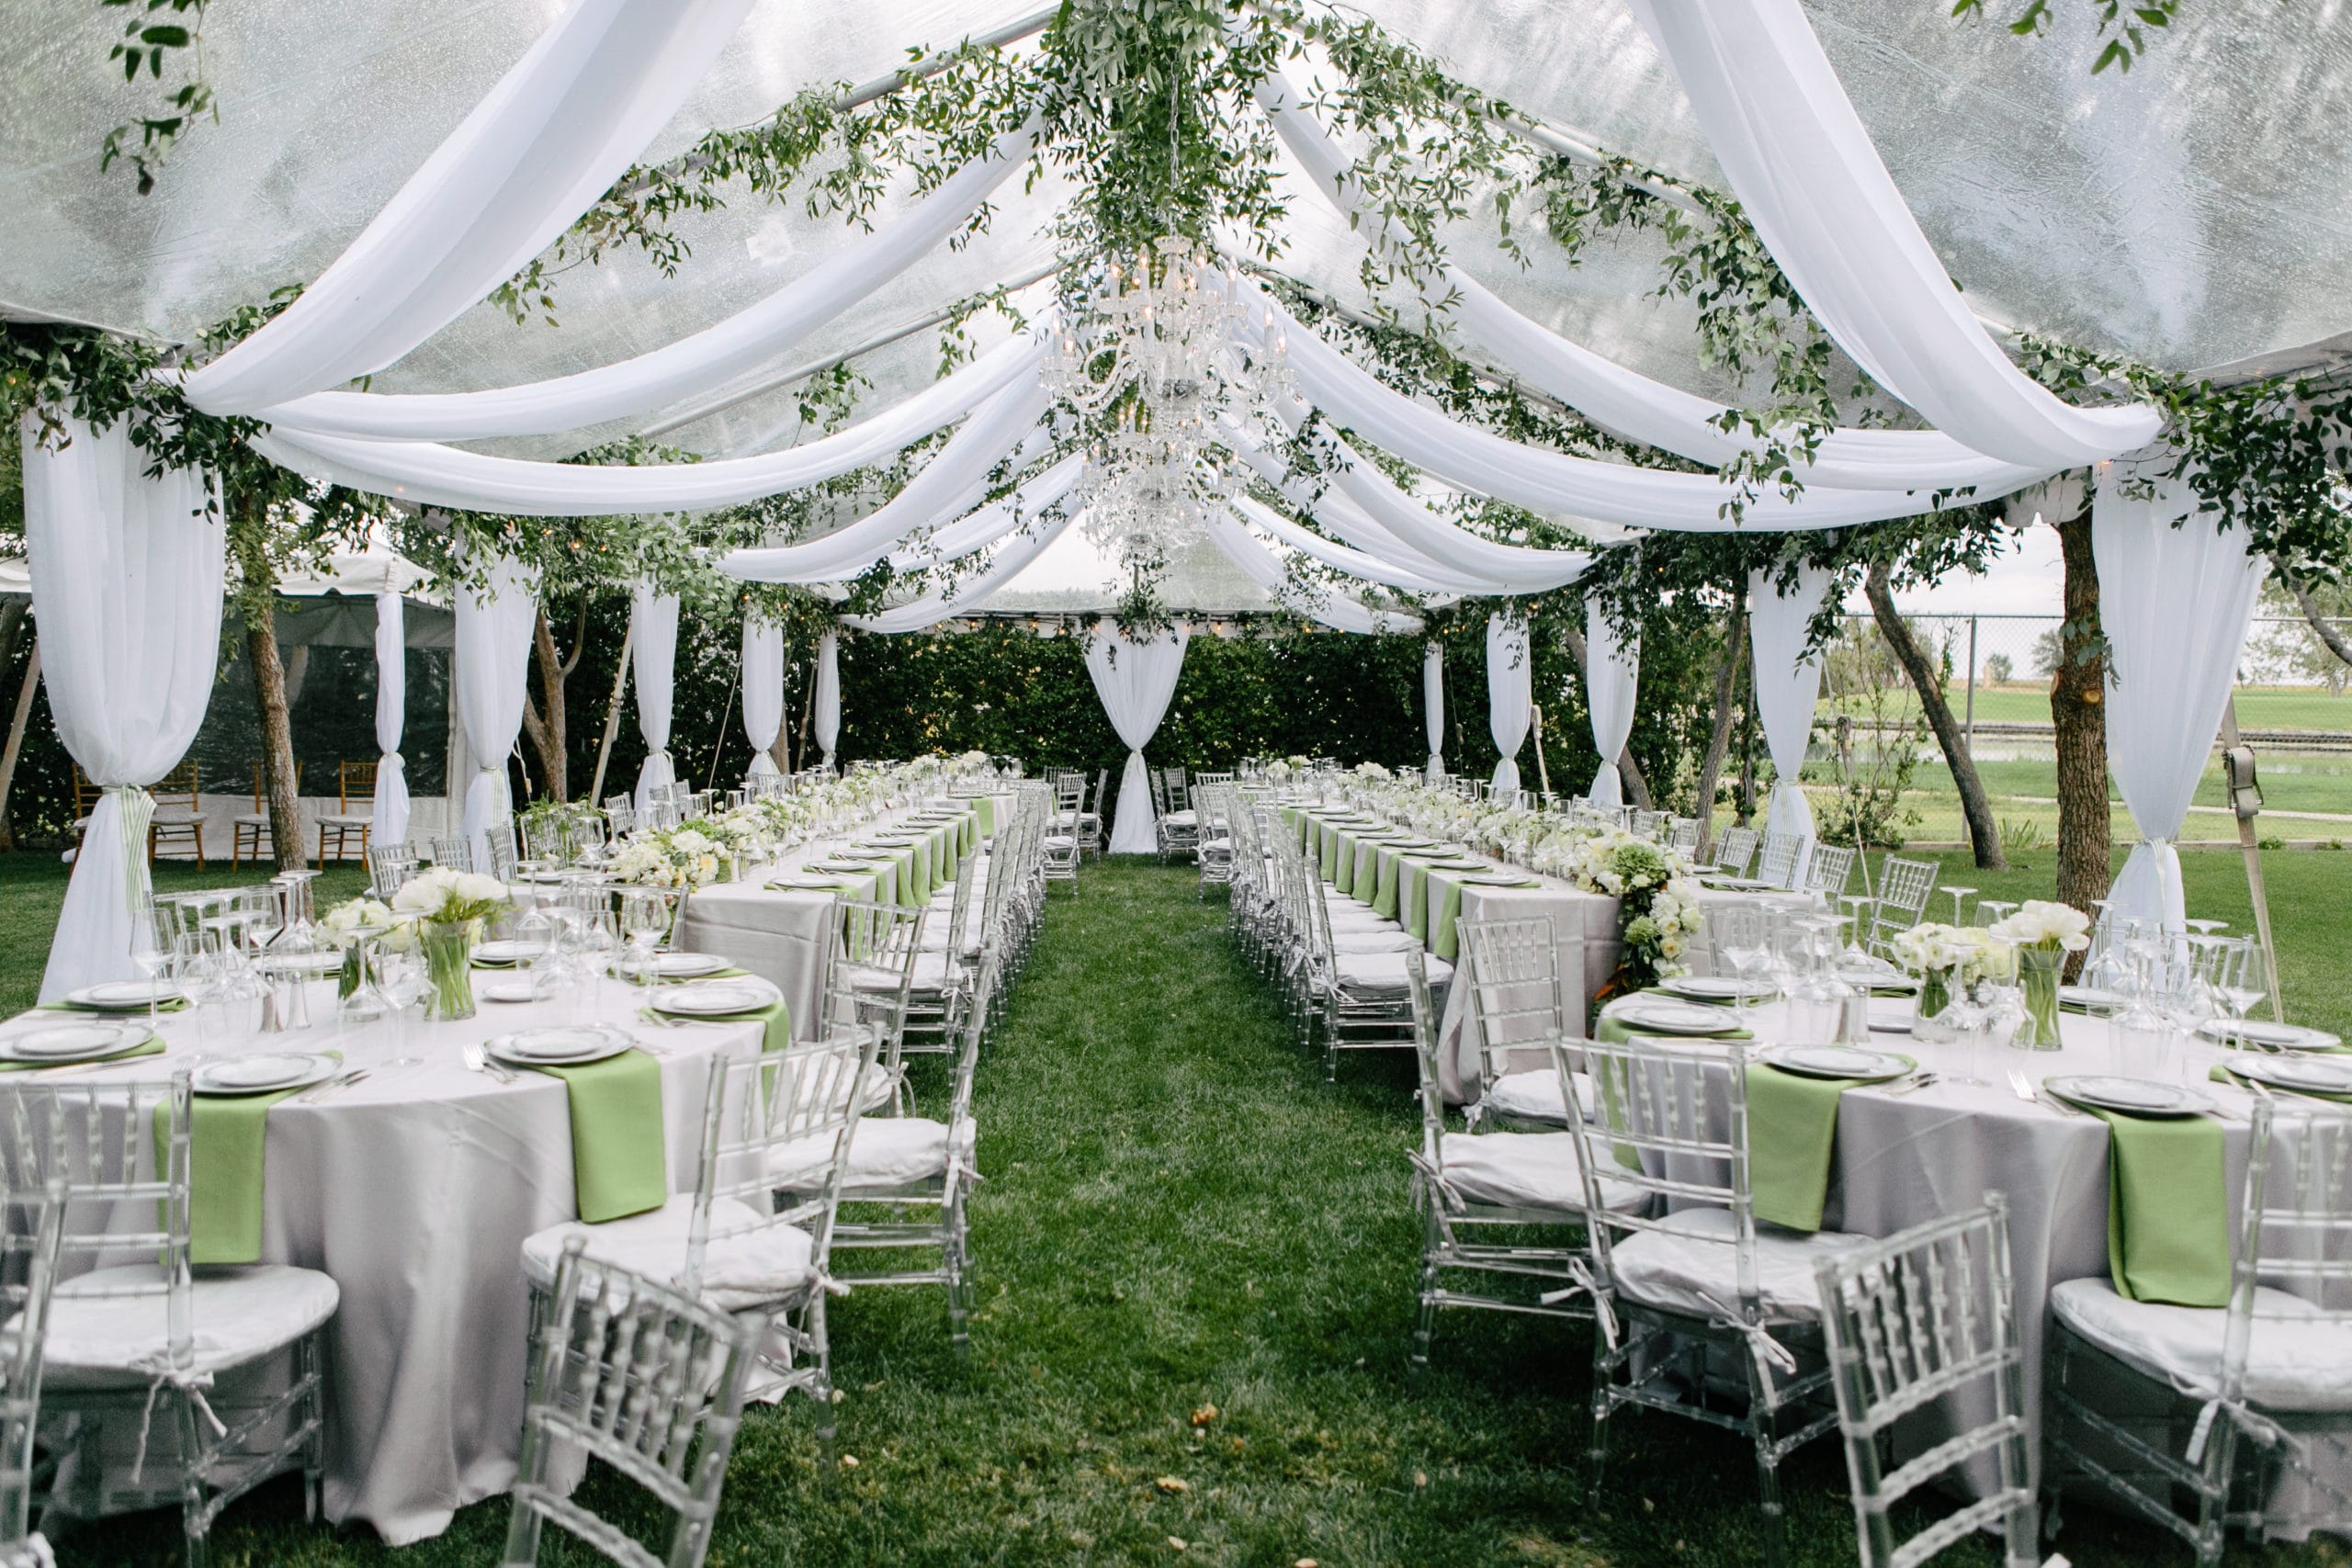 Massachusetts Party Rentals for Outdoor Gatherings